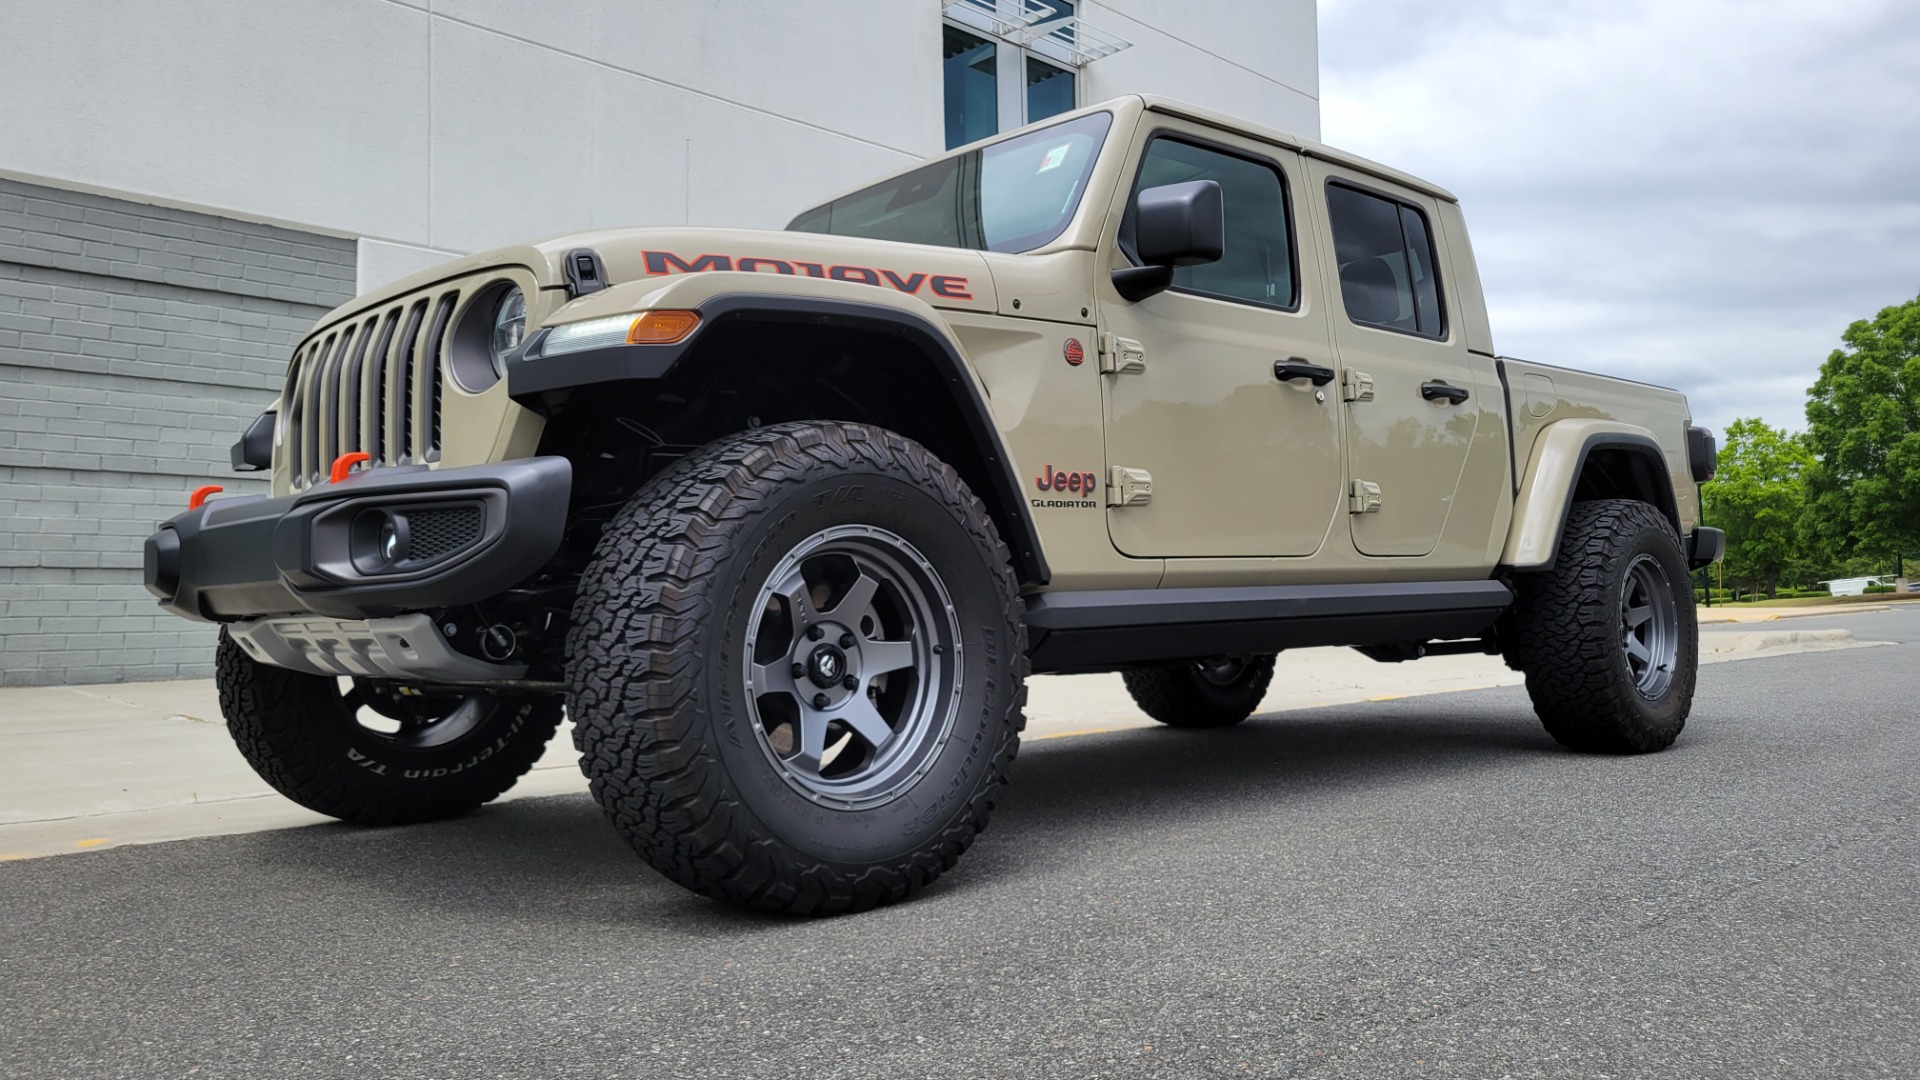 Used 2020 Jeep GLADIATOR MOJAVE 4X4 / 3.6L / AUTO / NAV / COLOR HARD-TOP / ALPINE / REARVIEW for sale $58,995 at Formula Imports in Charlotte NC 28227 3